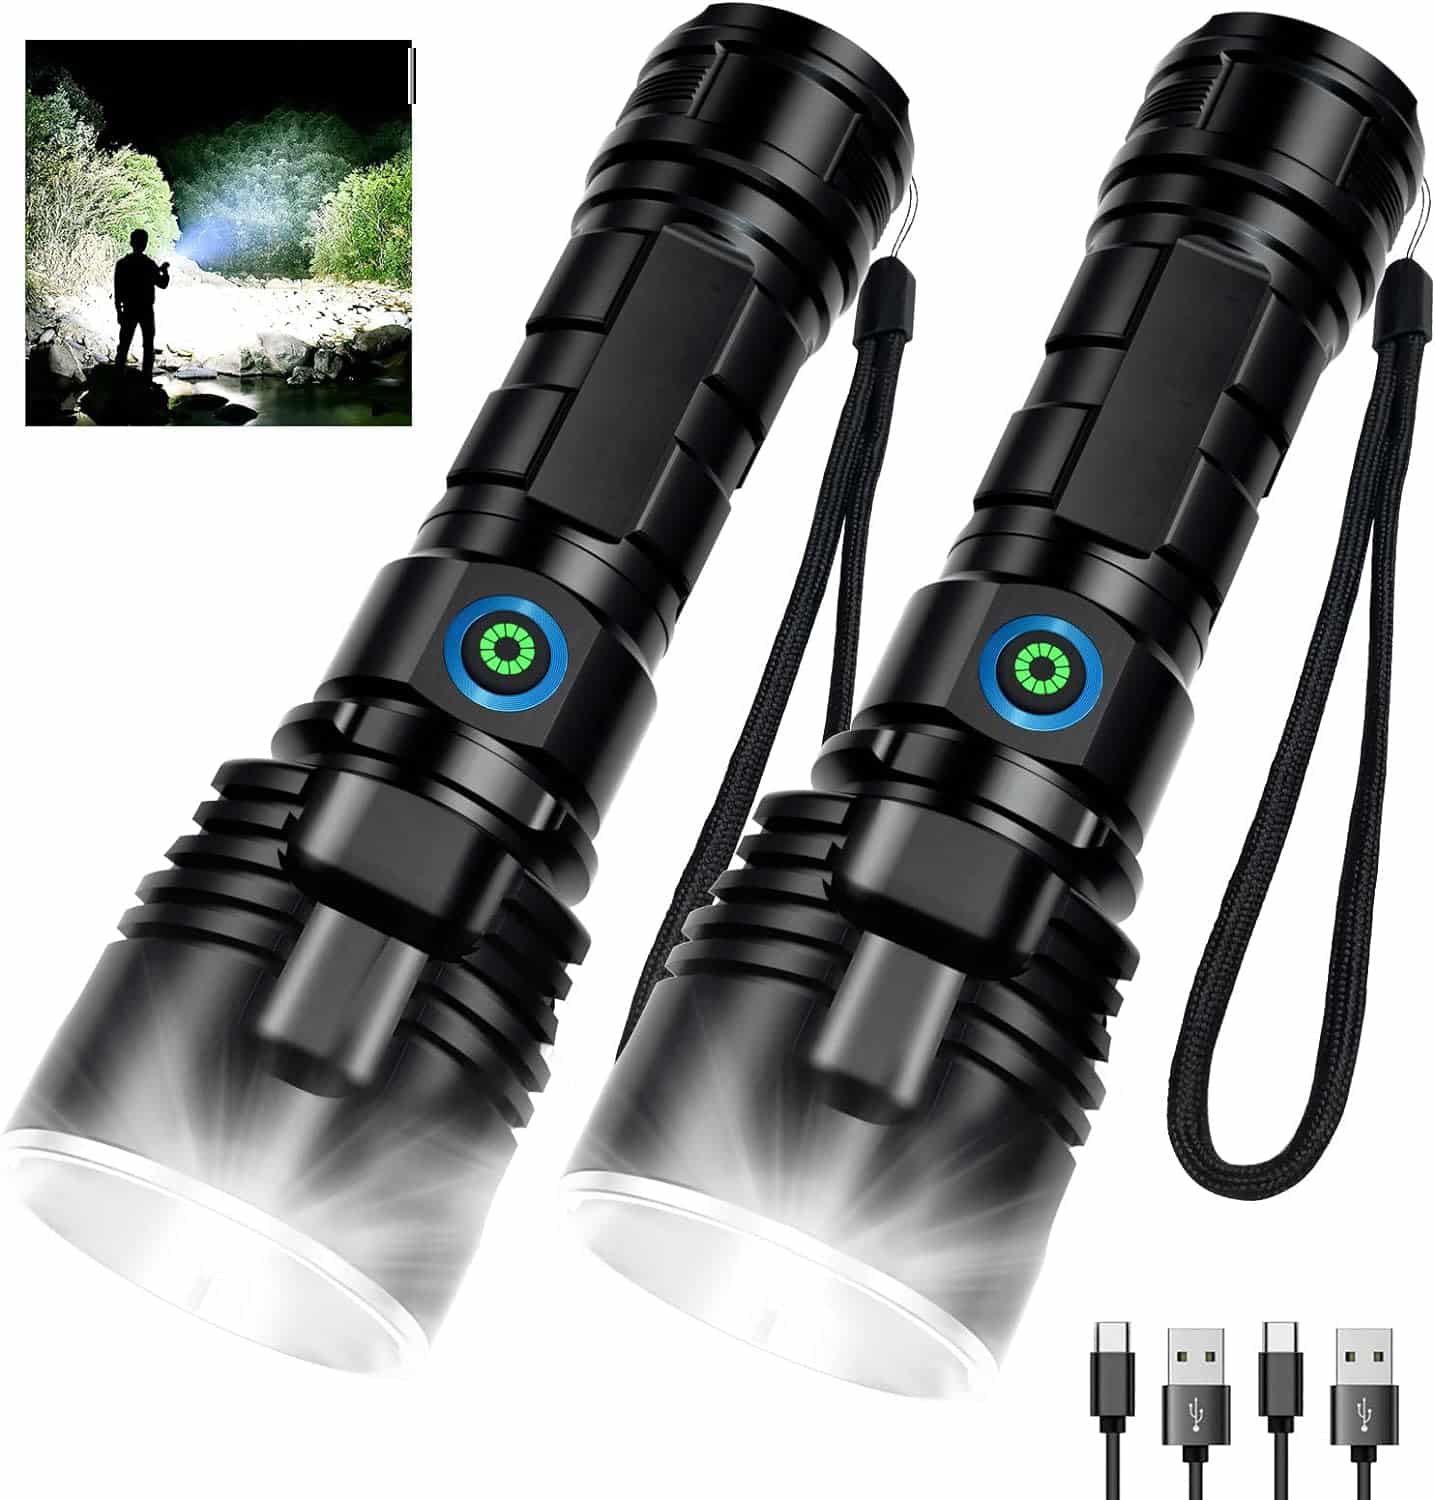 MILAOSHU Rechargeable Flashlights 900,000 High Lumens - 2 Pack, 12 Hours Powerful LED Flash Light with 3 Modes, Super Bright  IPX5 Waterproof Torch for Camping, Home, Emergencies